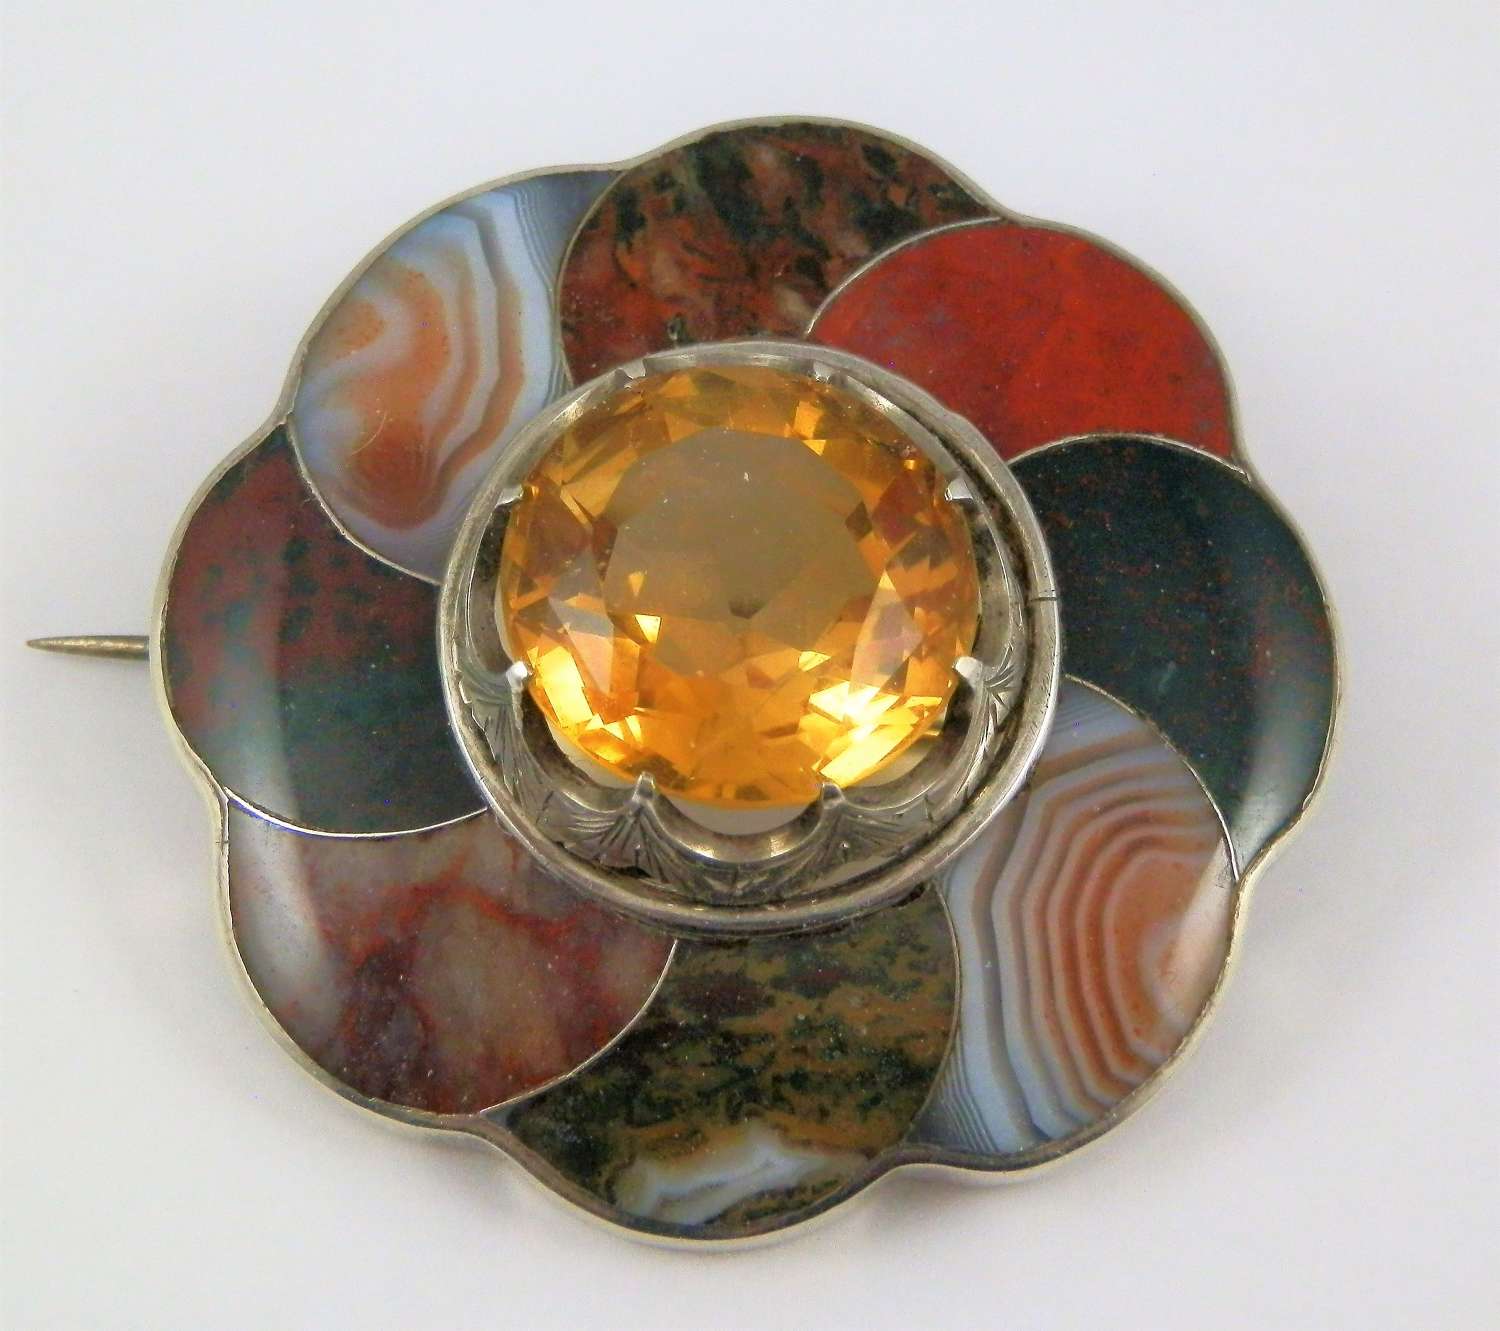 Scottish silver, citrine and agate brooch, c.1880